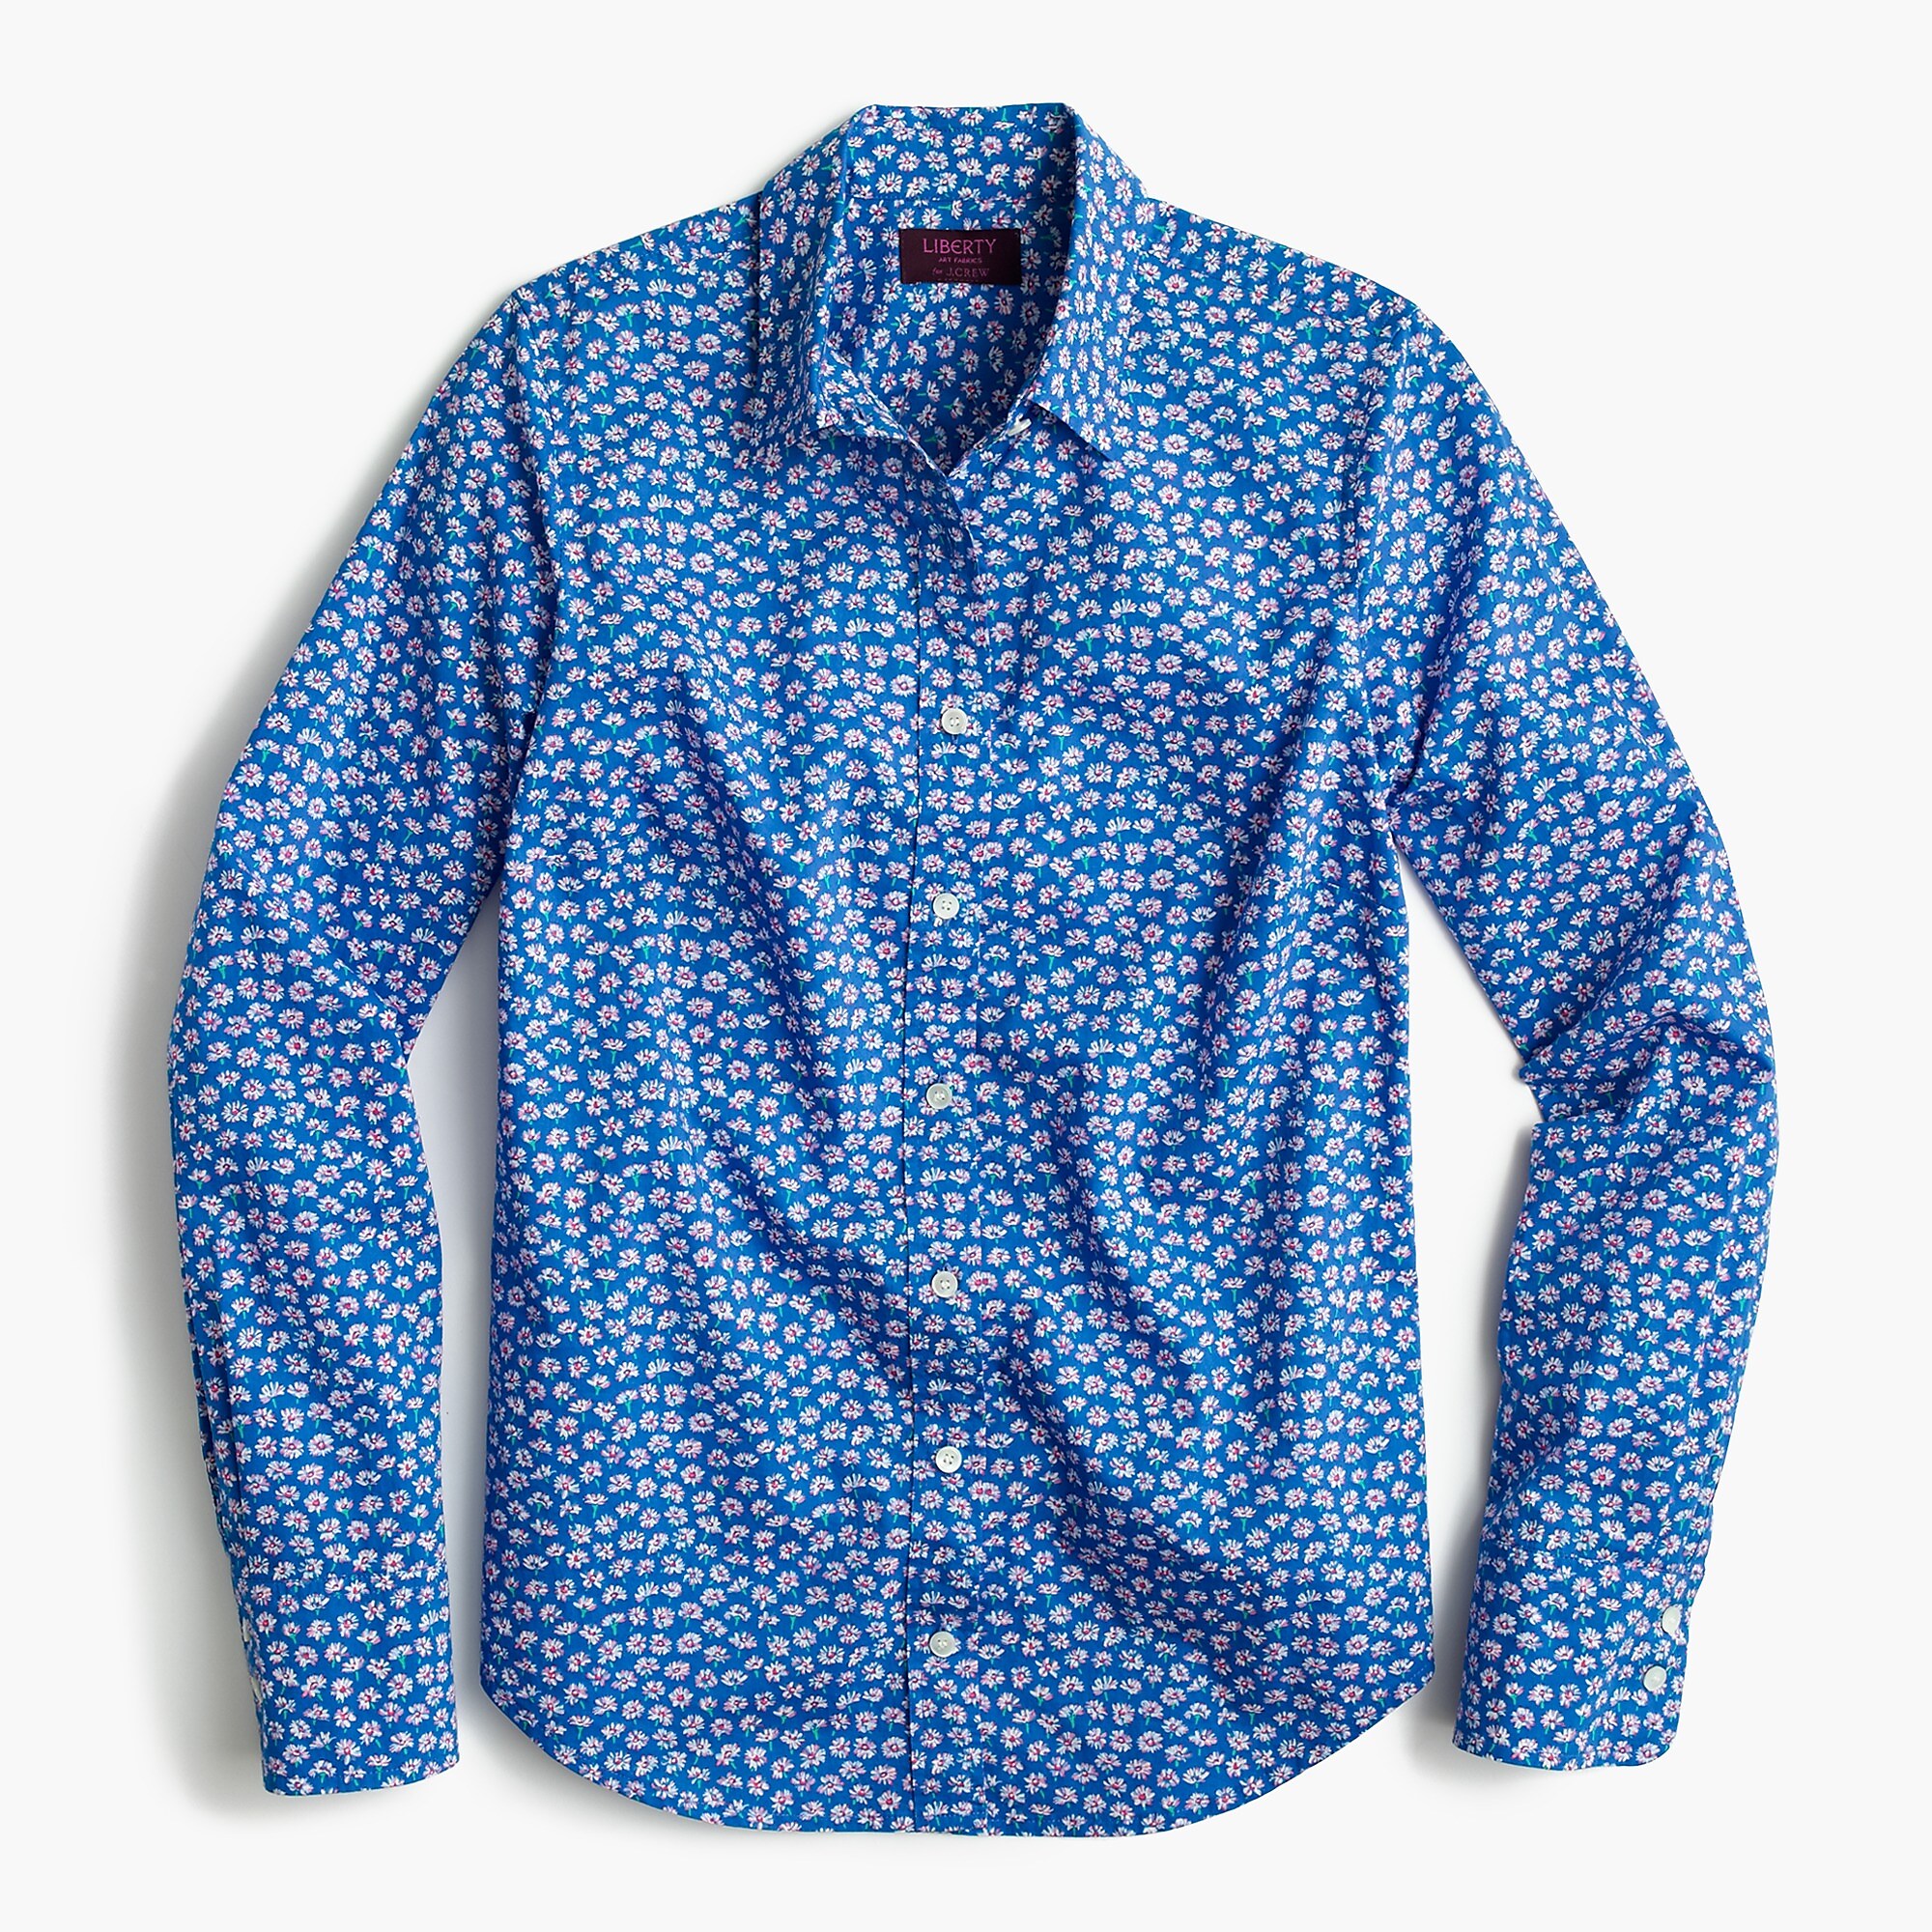 Shop J.Crew for the Perfect shirt in Liberty Art Fabrics Bellis print for W...